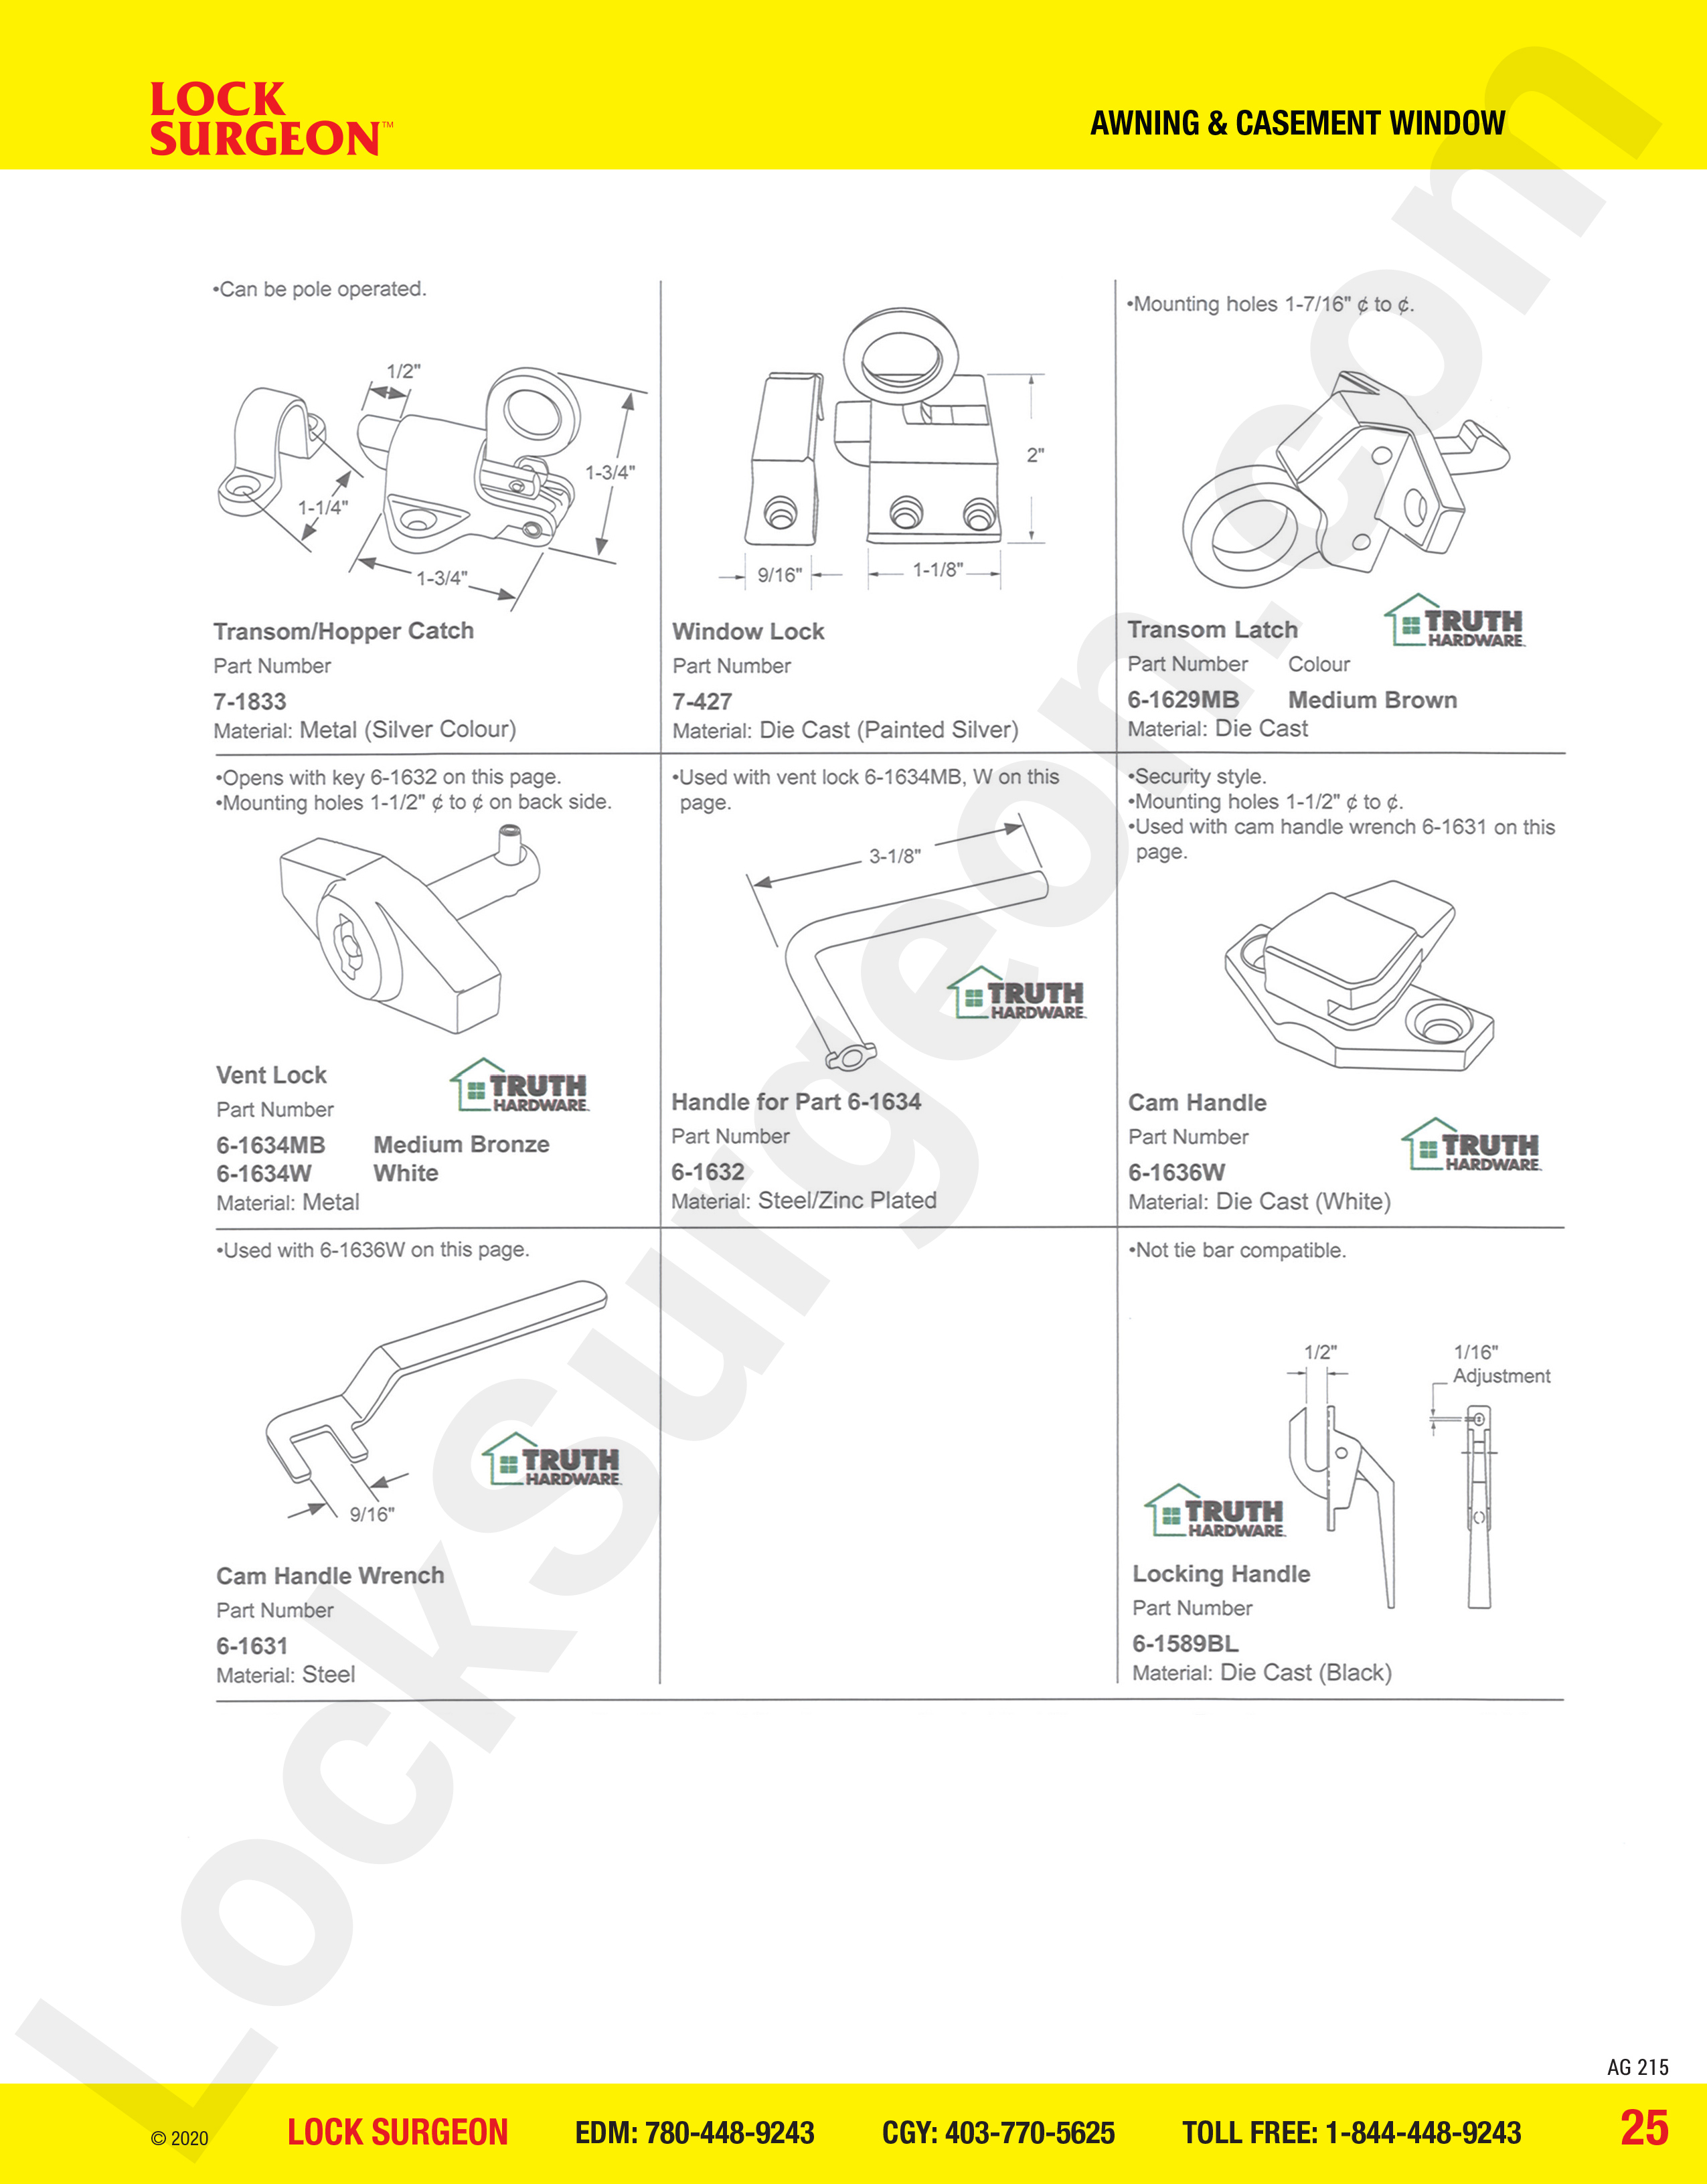 awning & casement window parts for catch, latch, lock handle, transom latch, vent lock, cam handles.